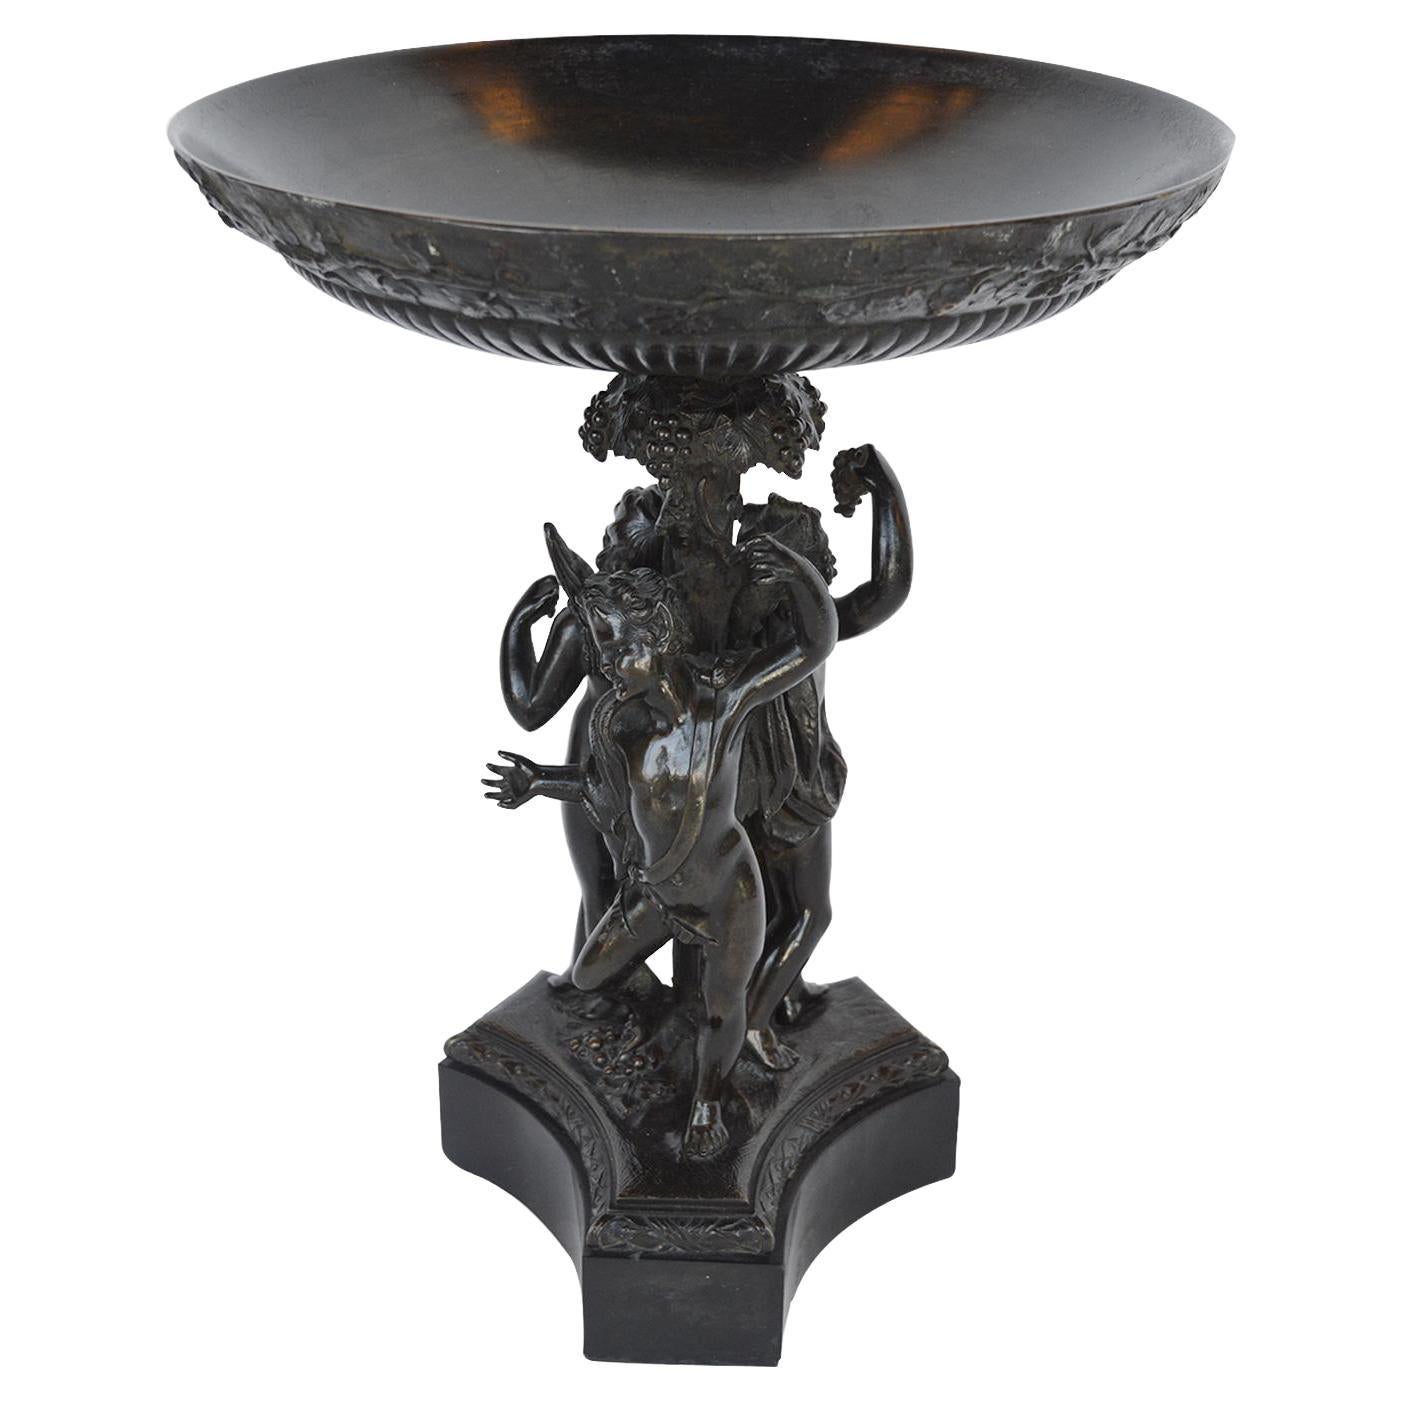 Italian Bronze and Black Marble Bacchanalian Figural Tazza, Early 19th Century For Sale